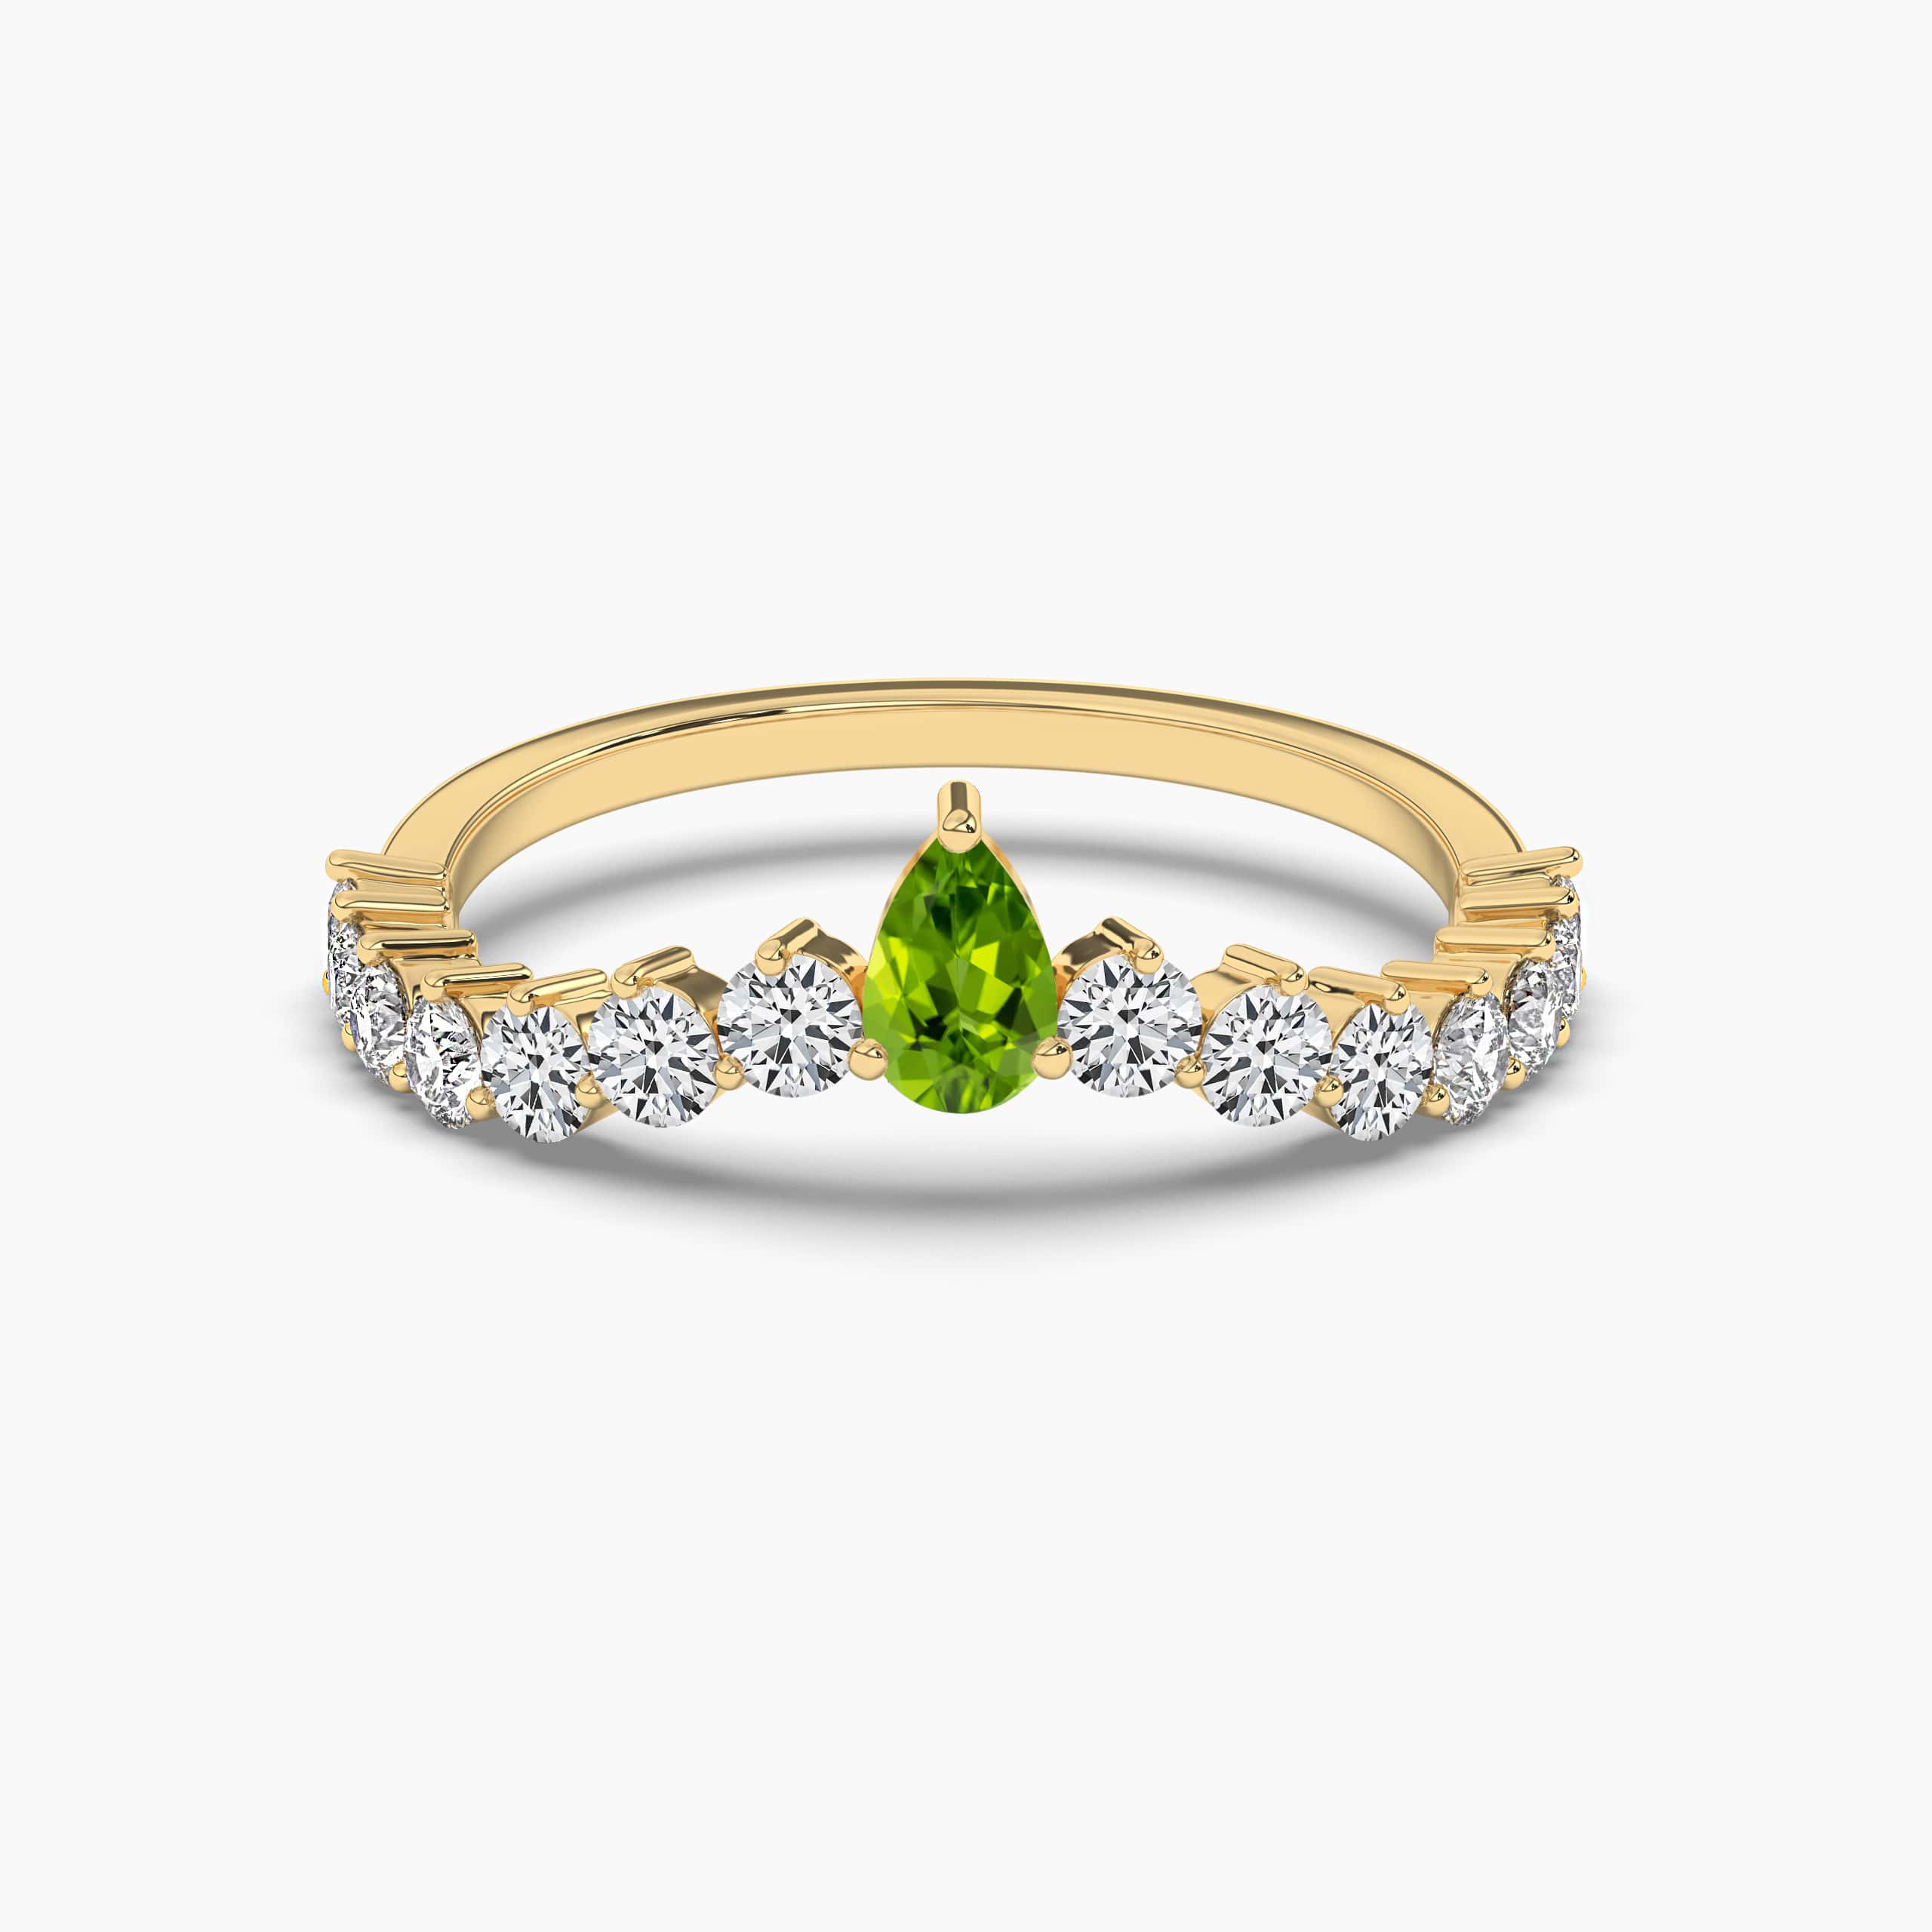 Peridot engagement ring with accent gemstones or big pear gemstone ring